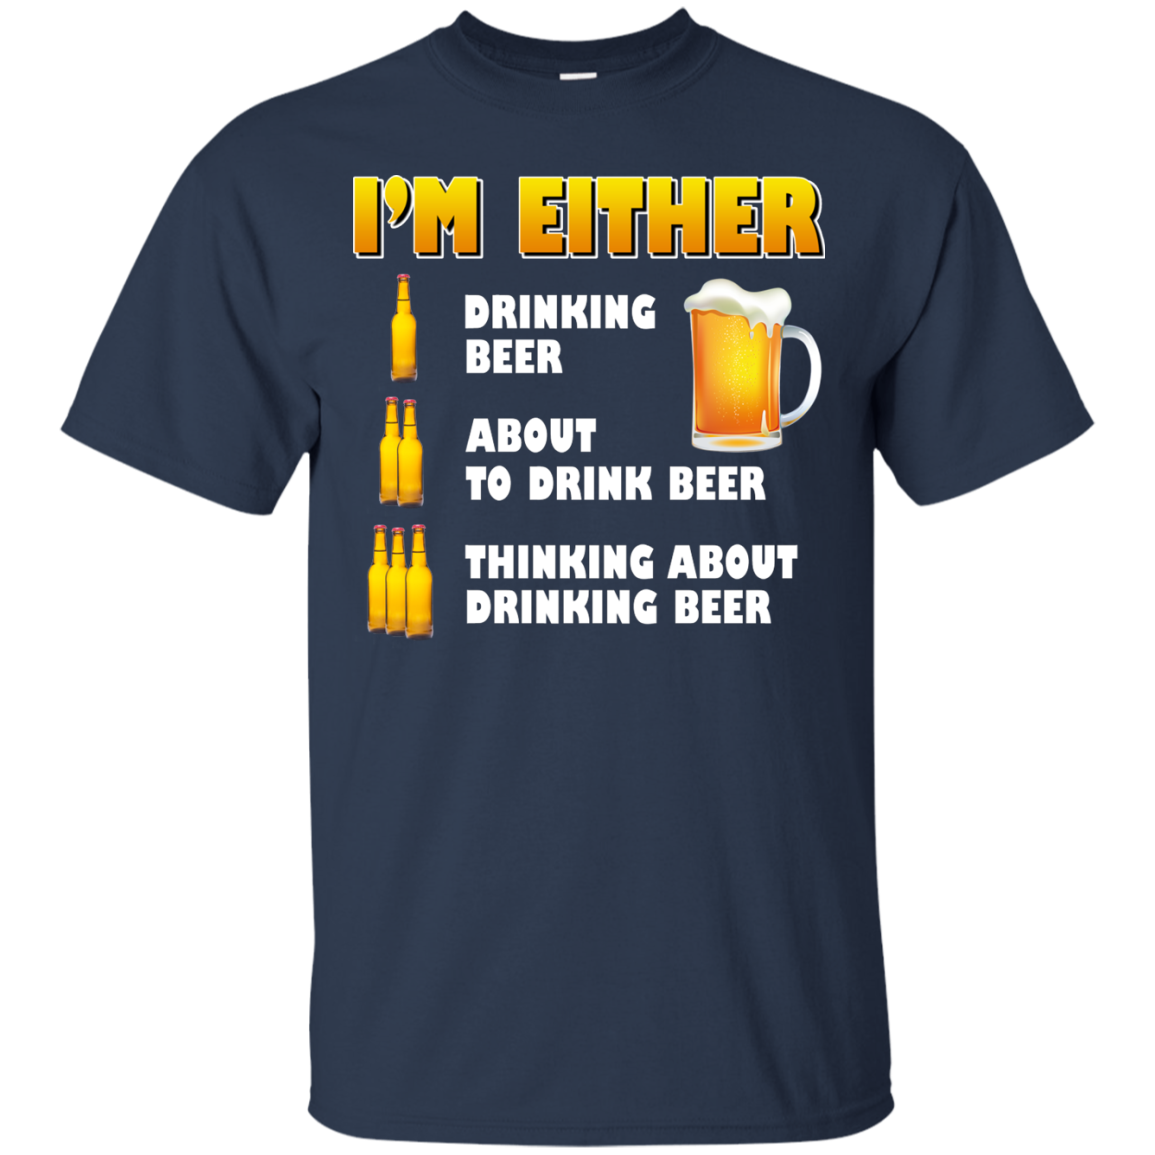 I'm Either Drinking Beer - About To Drink Beer Shirt, Hoodie | AllBlueTees